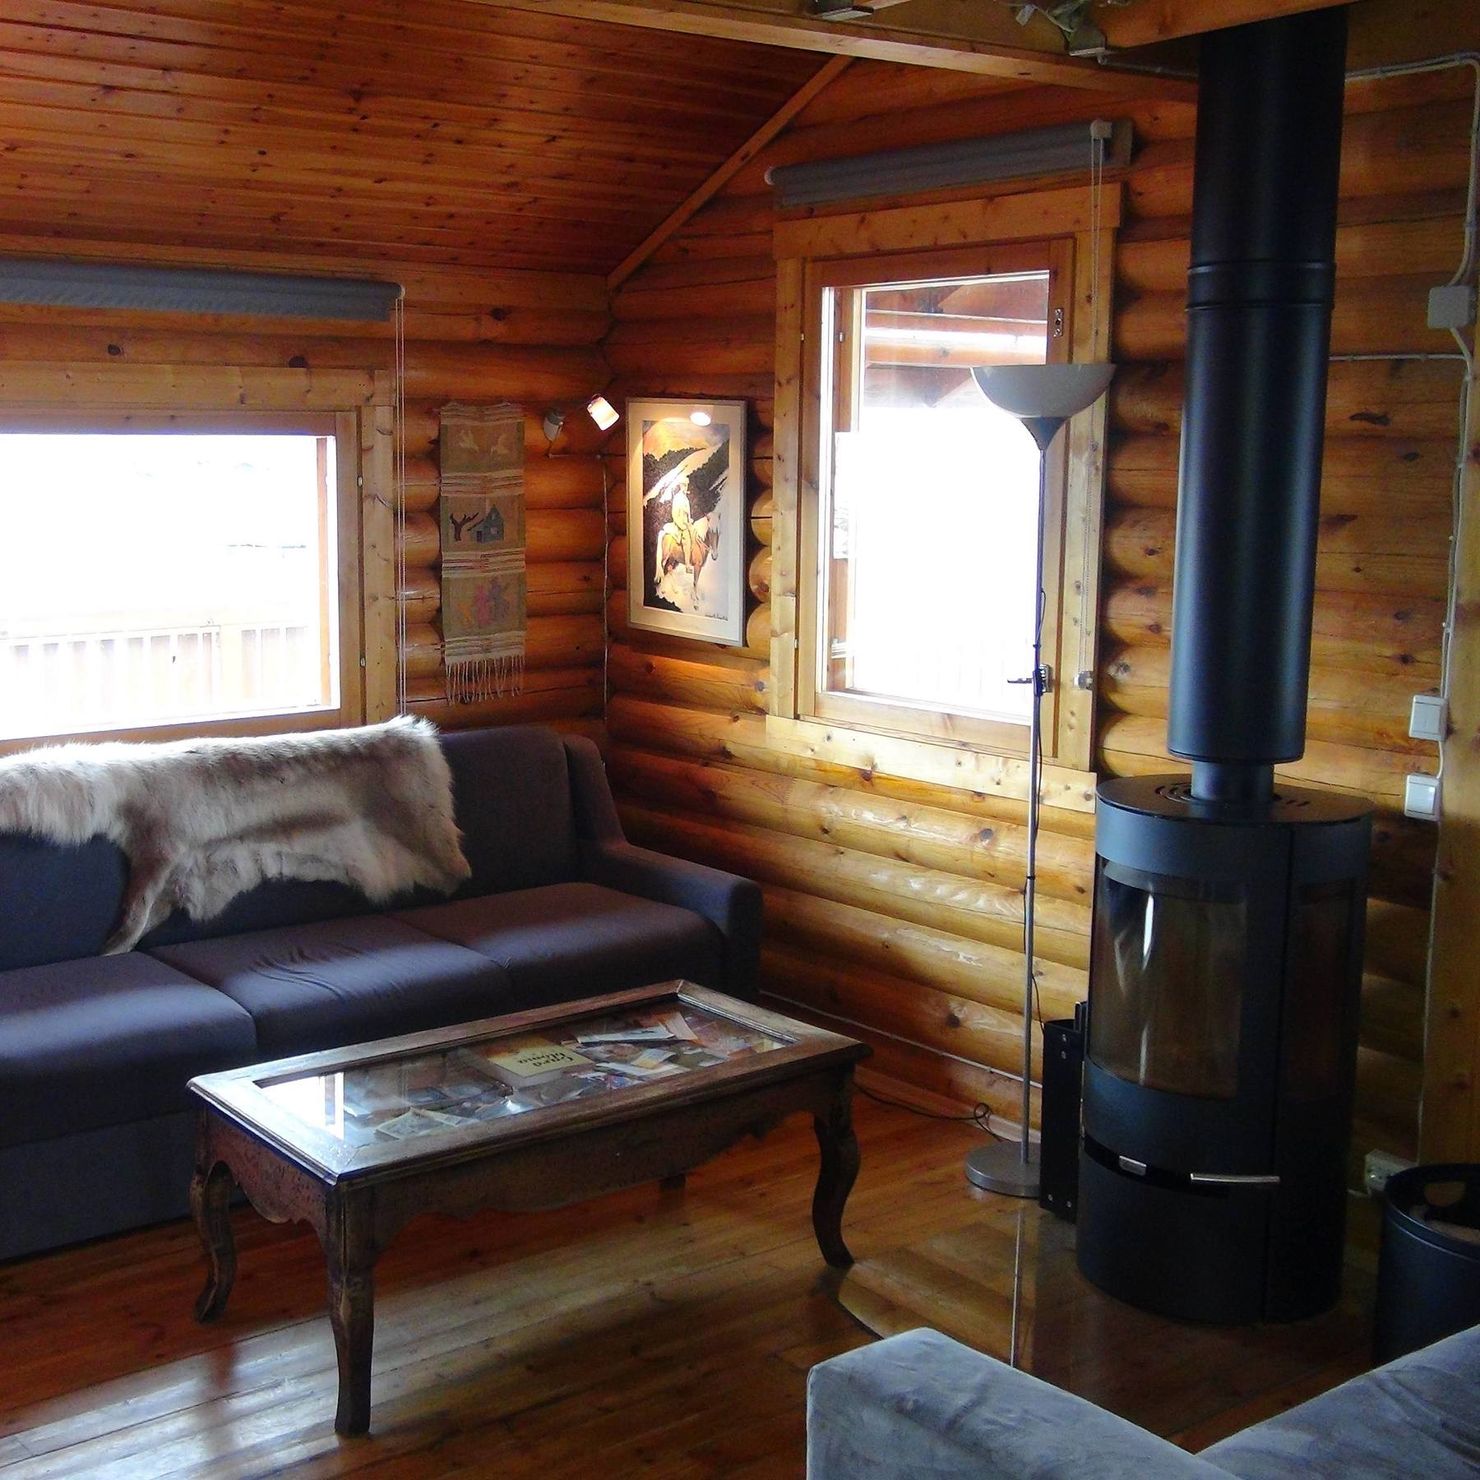 In the living room there are couches and a wood stove